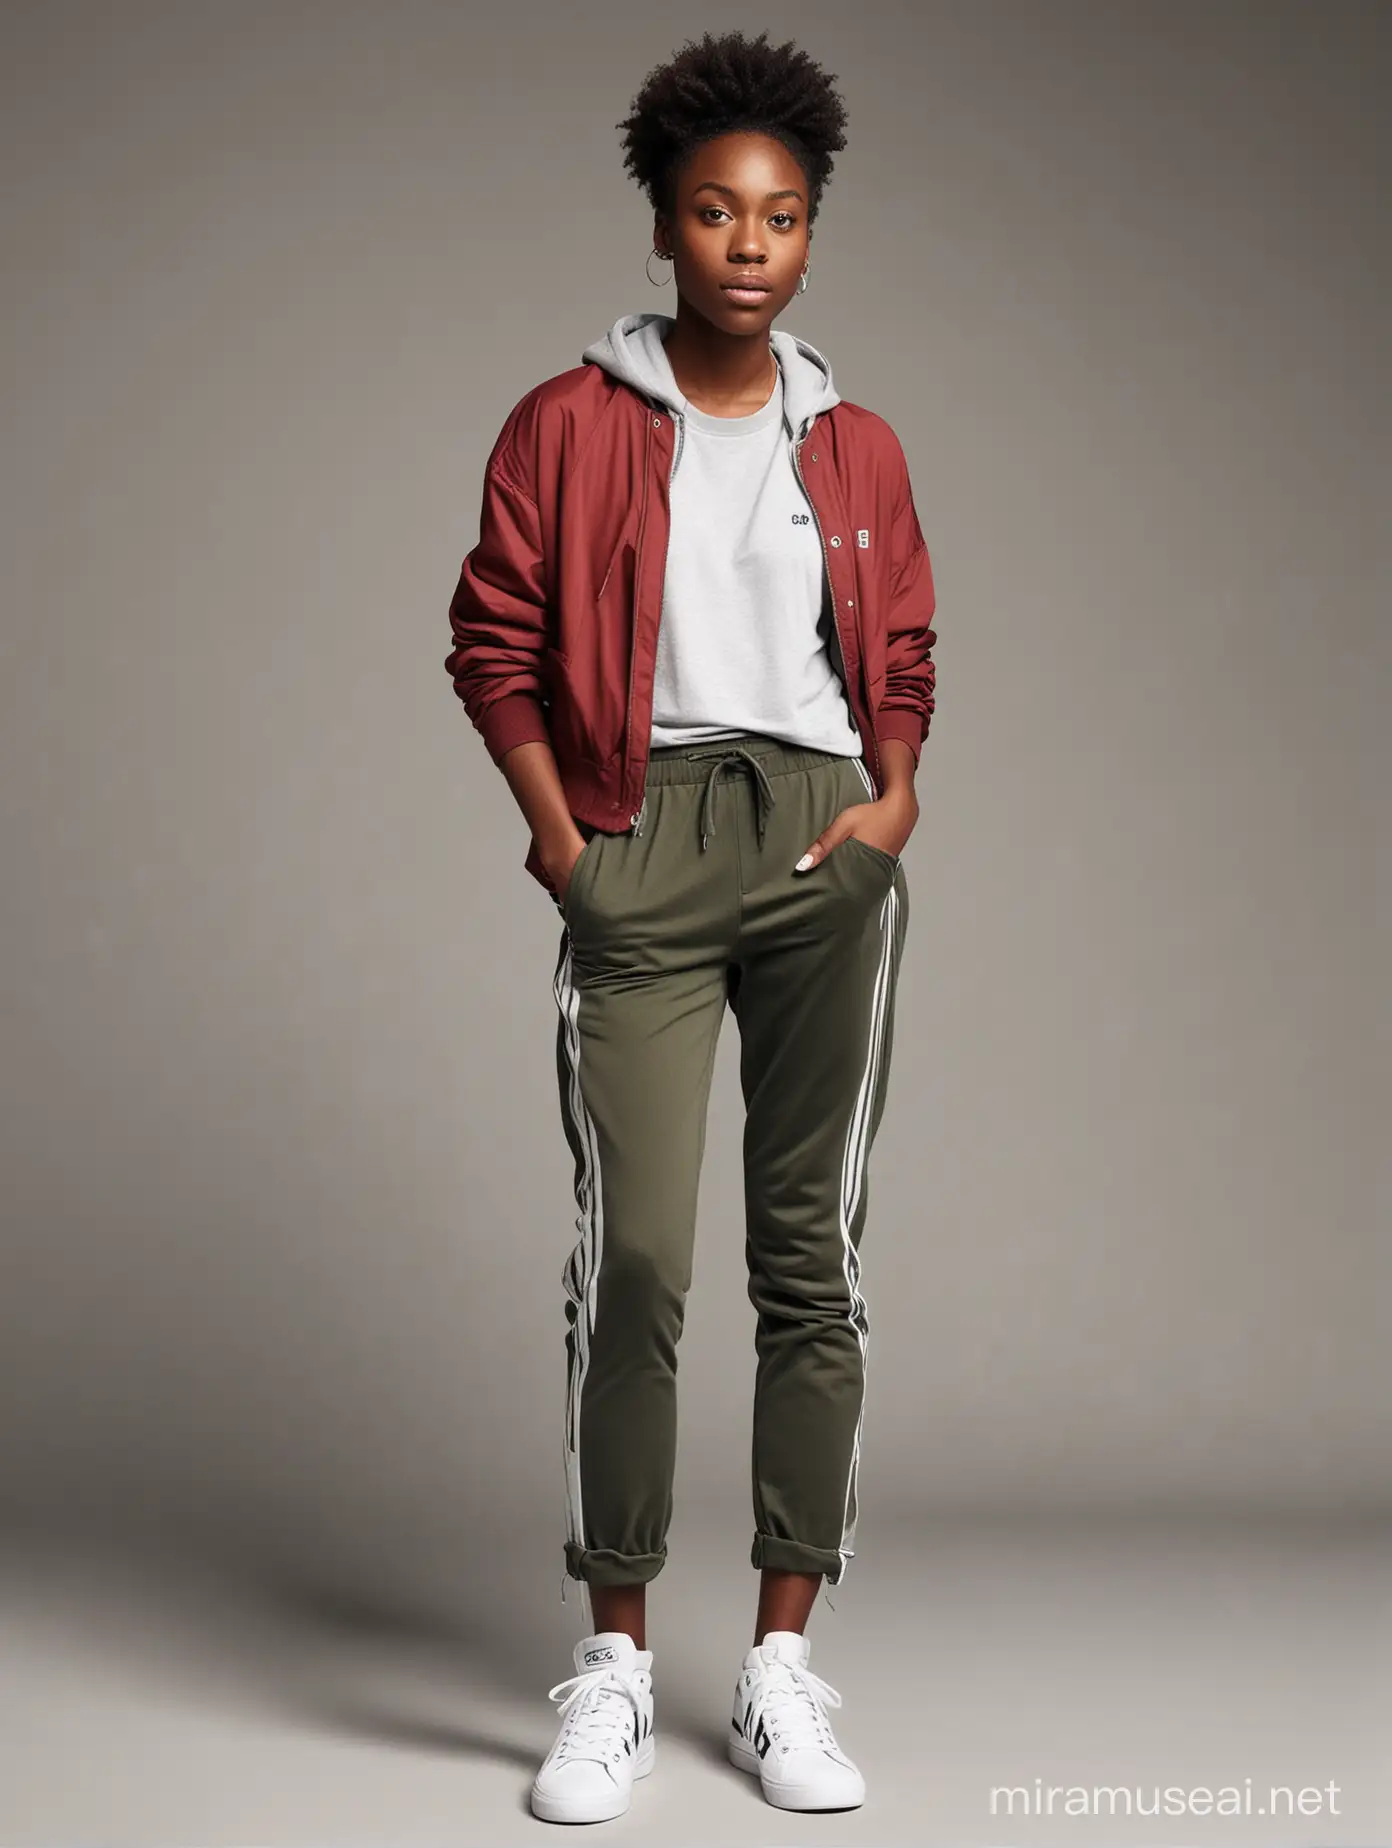 Athletic androgynous figure with gaptooth and sneakers